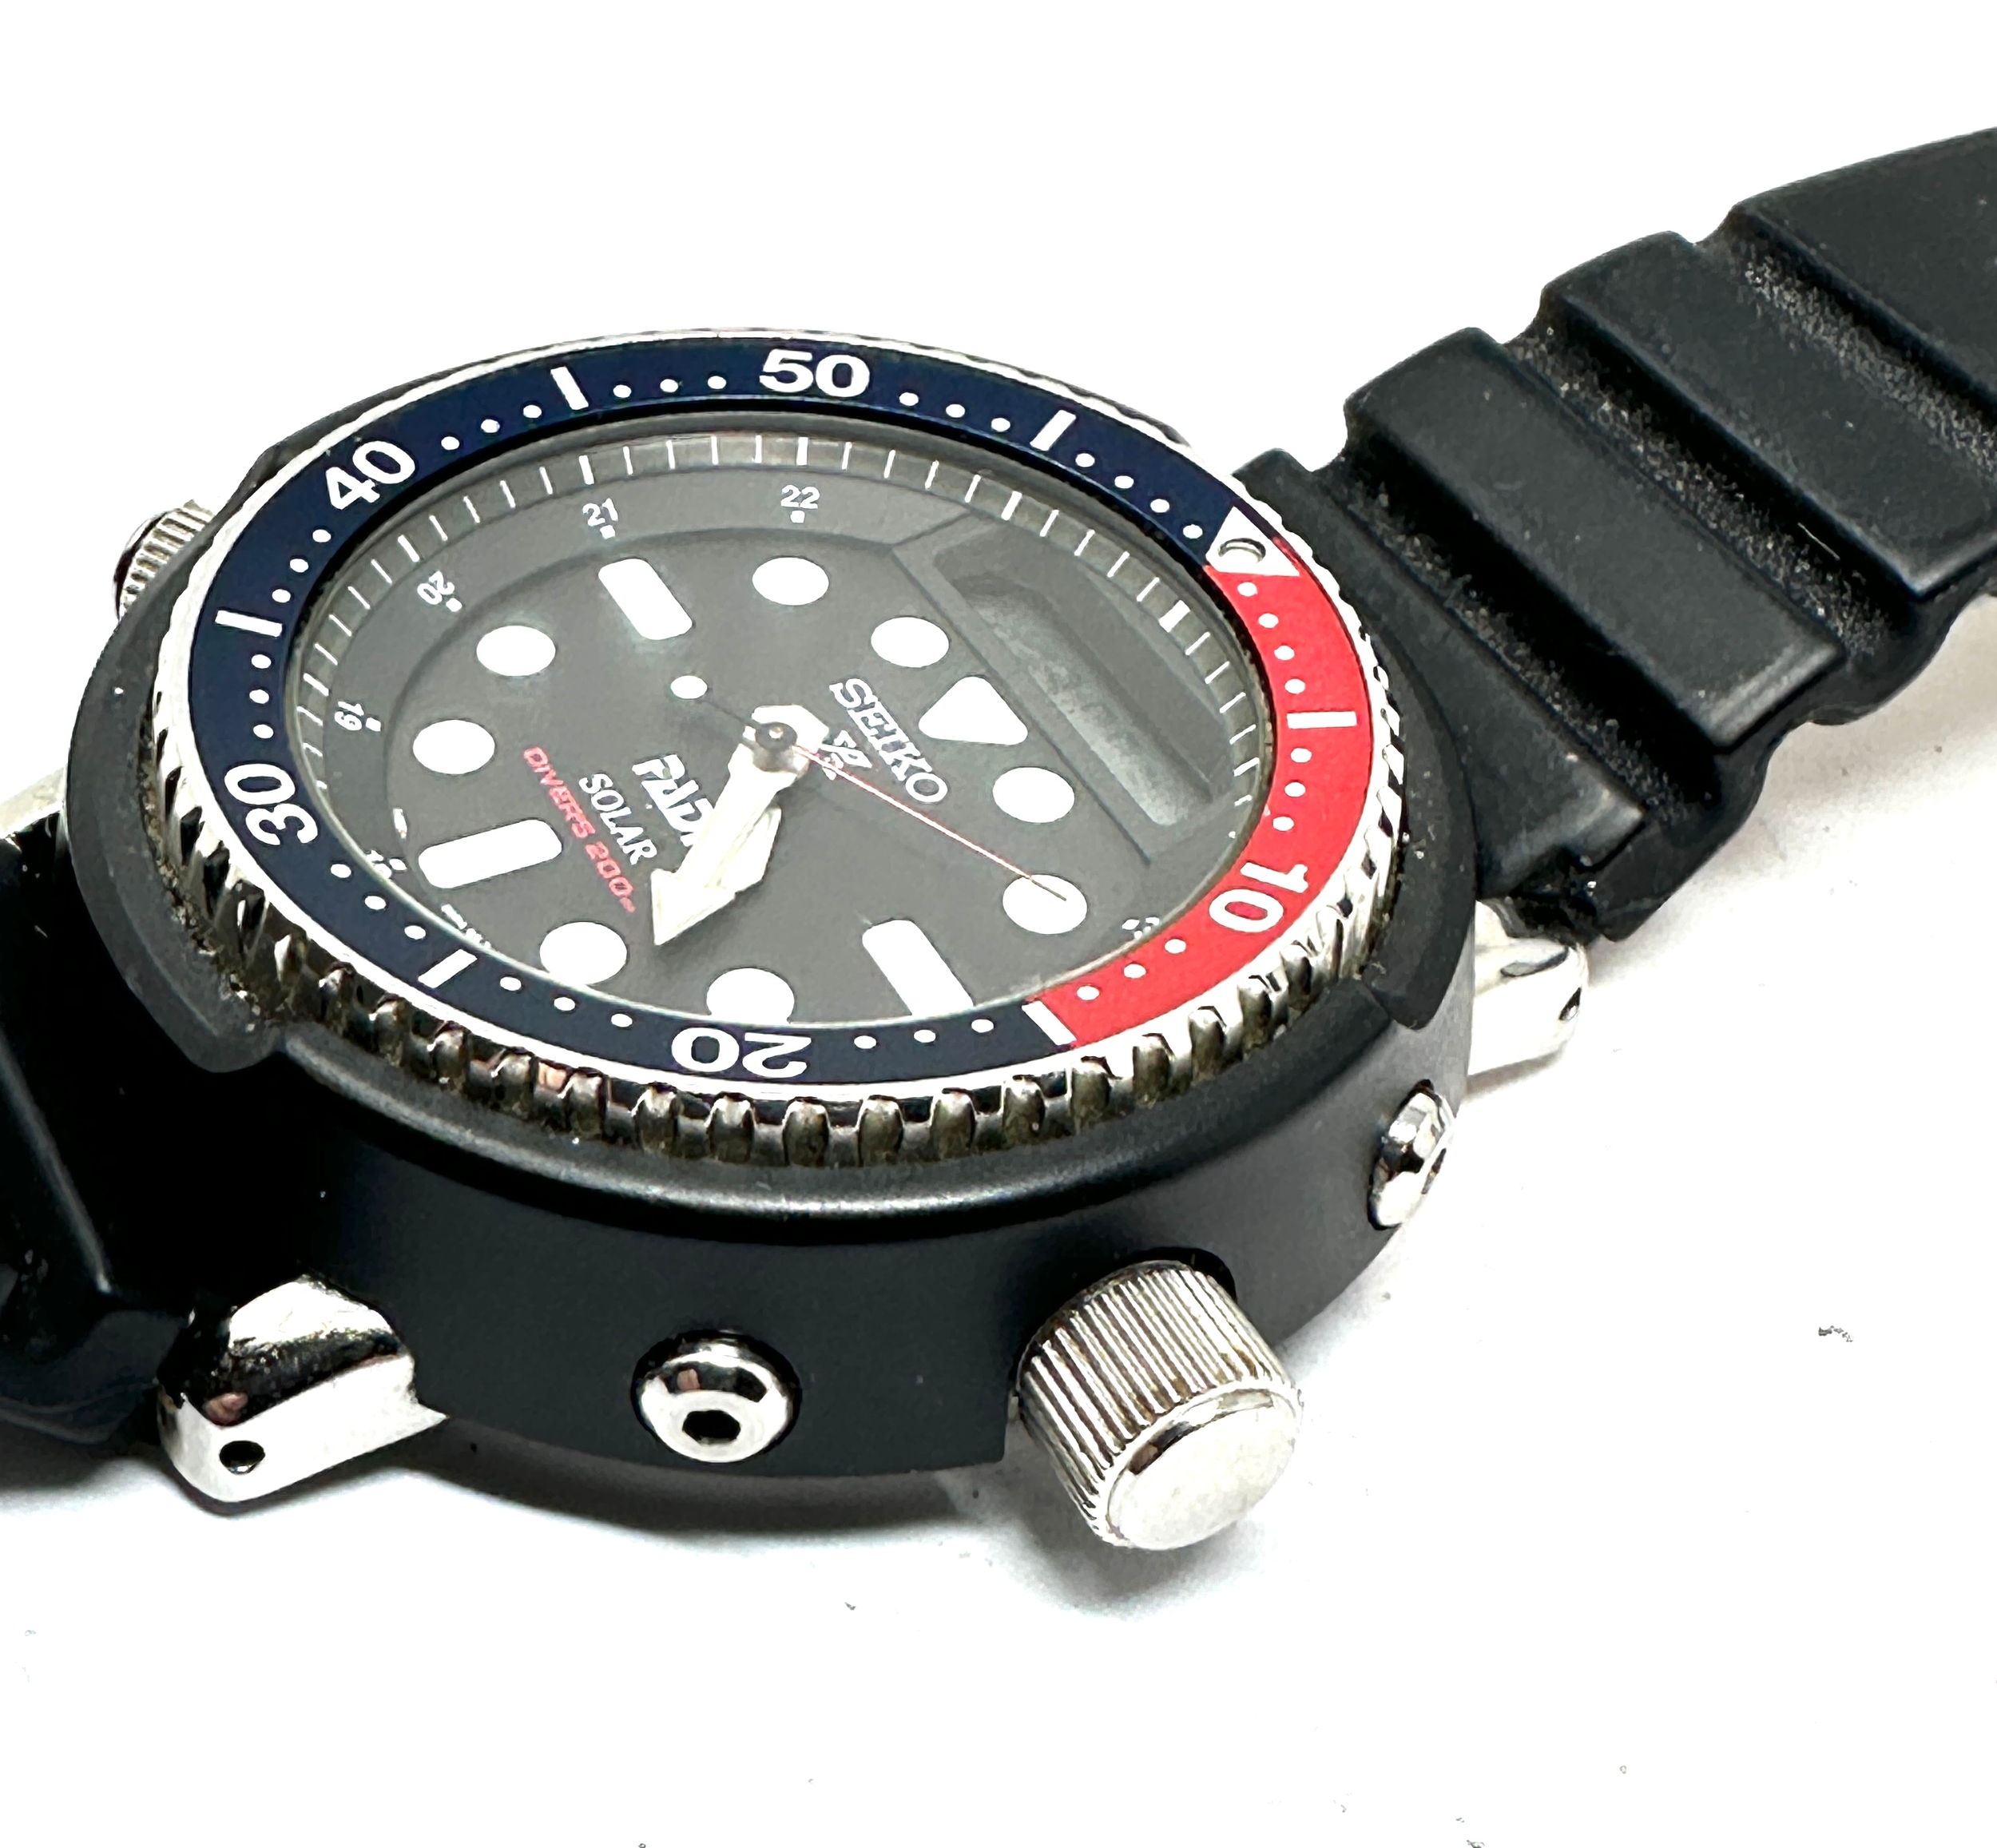 Seiko X PADI Diver 200M Solar H851-00A0 Men's Watch In working order in very good condition - Image 3 of 5